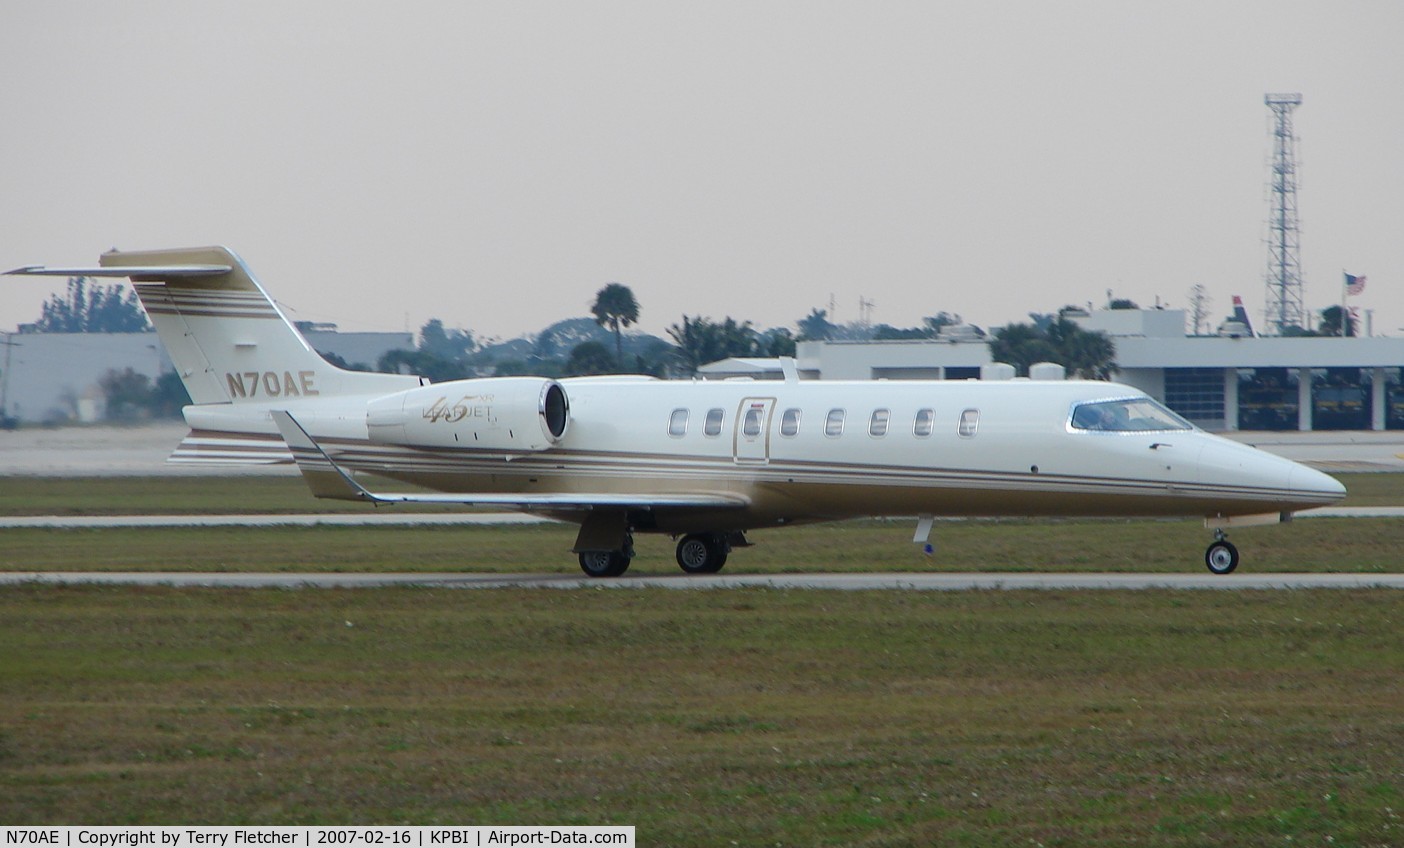 N70AE, Learjet Inc 45 C/N 227, part of the Friday afternoon arrivals 'rush' at PBI